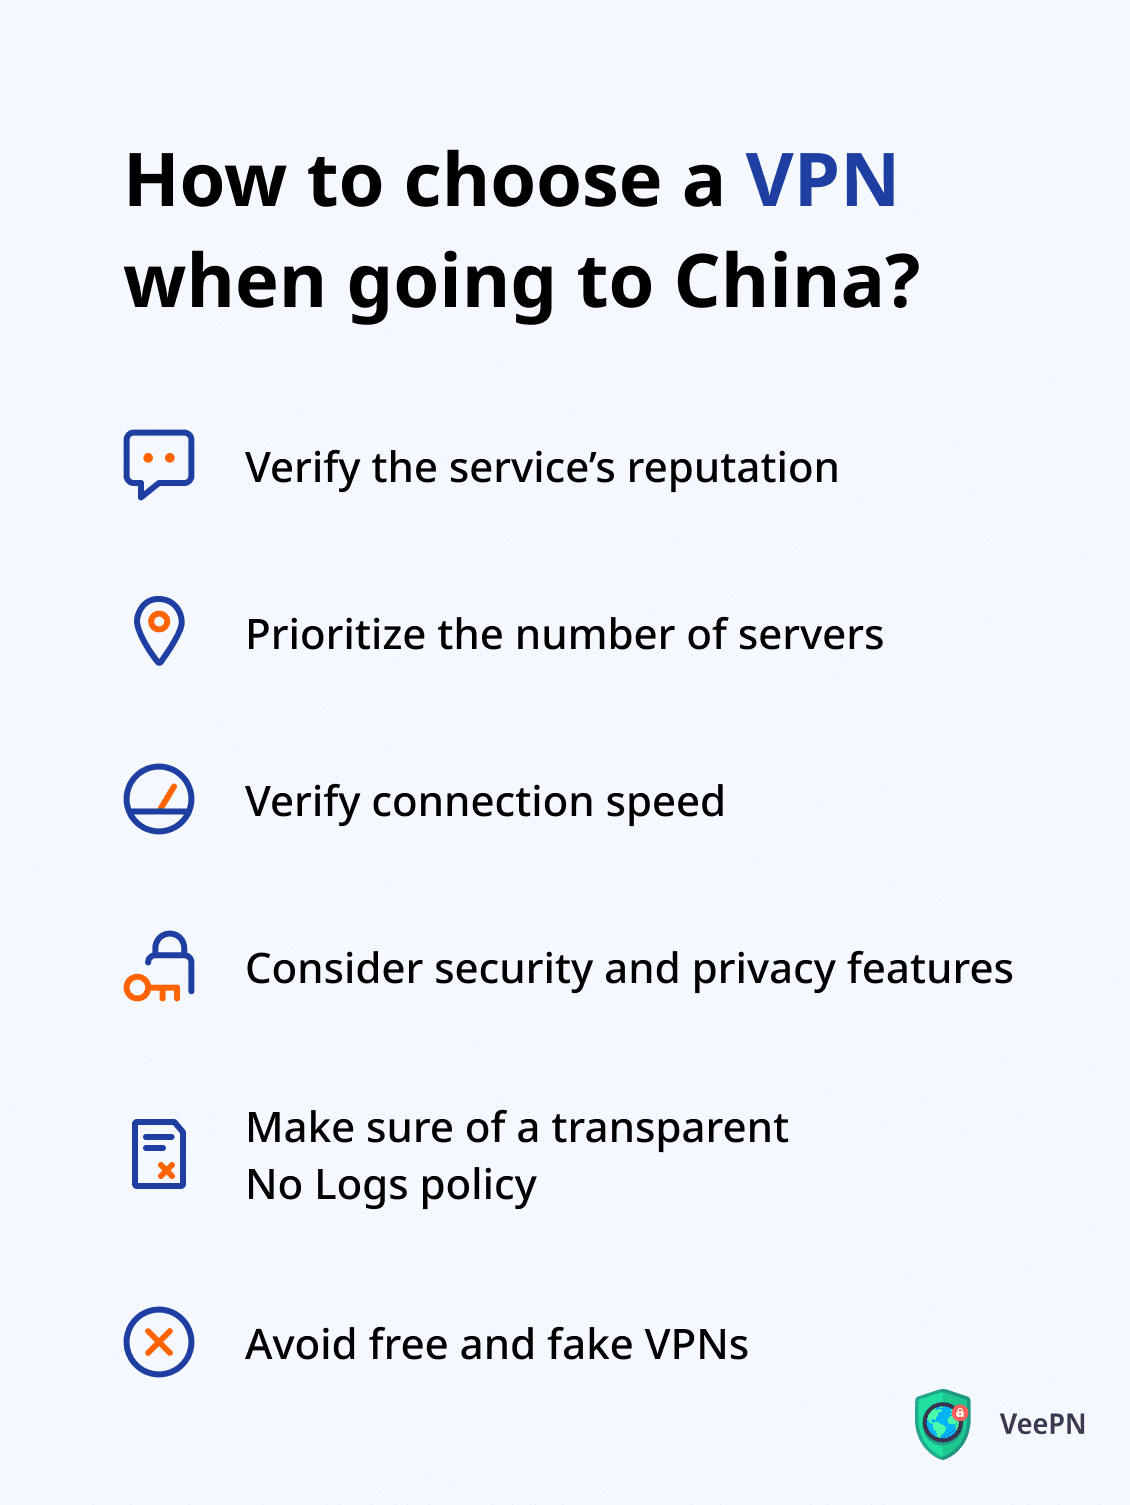 How to choose a VPN when going to China?